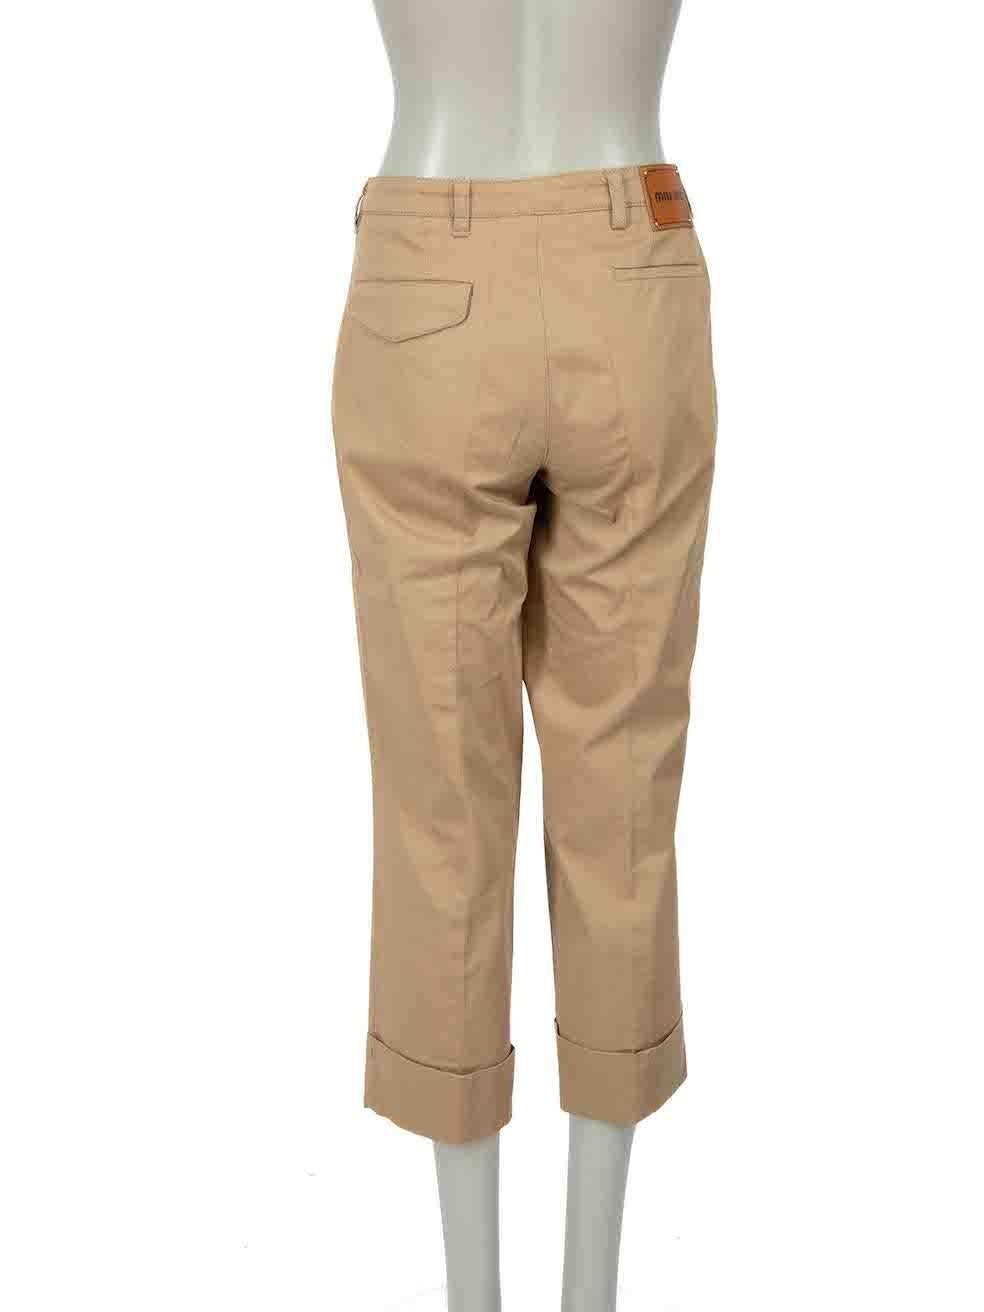 Miu Miu Beige Cuffed Tapered Chino Trousers Size L In Excellent Condition For Sale In London, GB